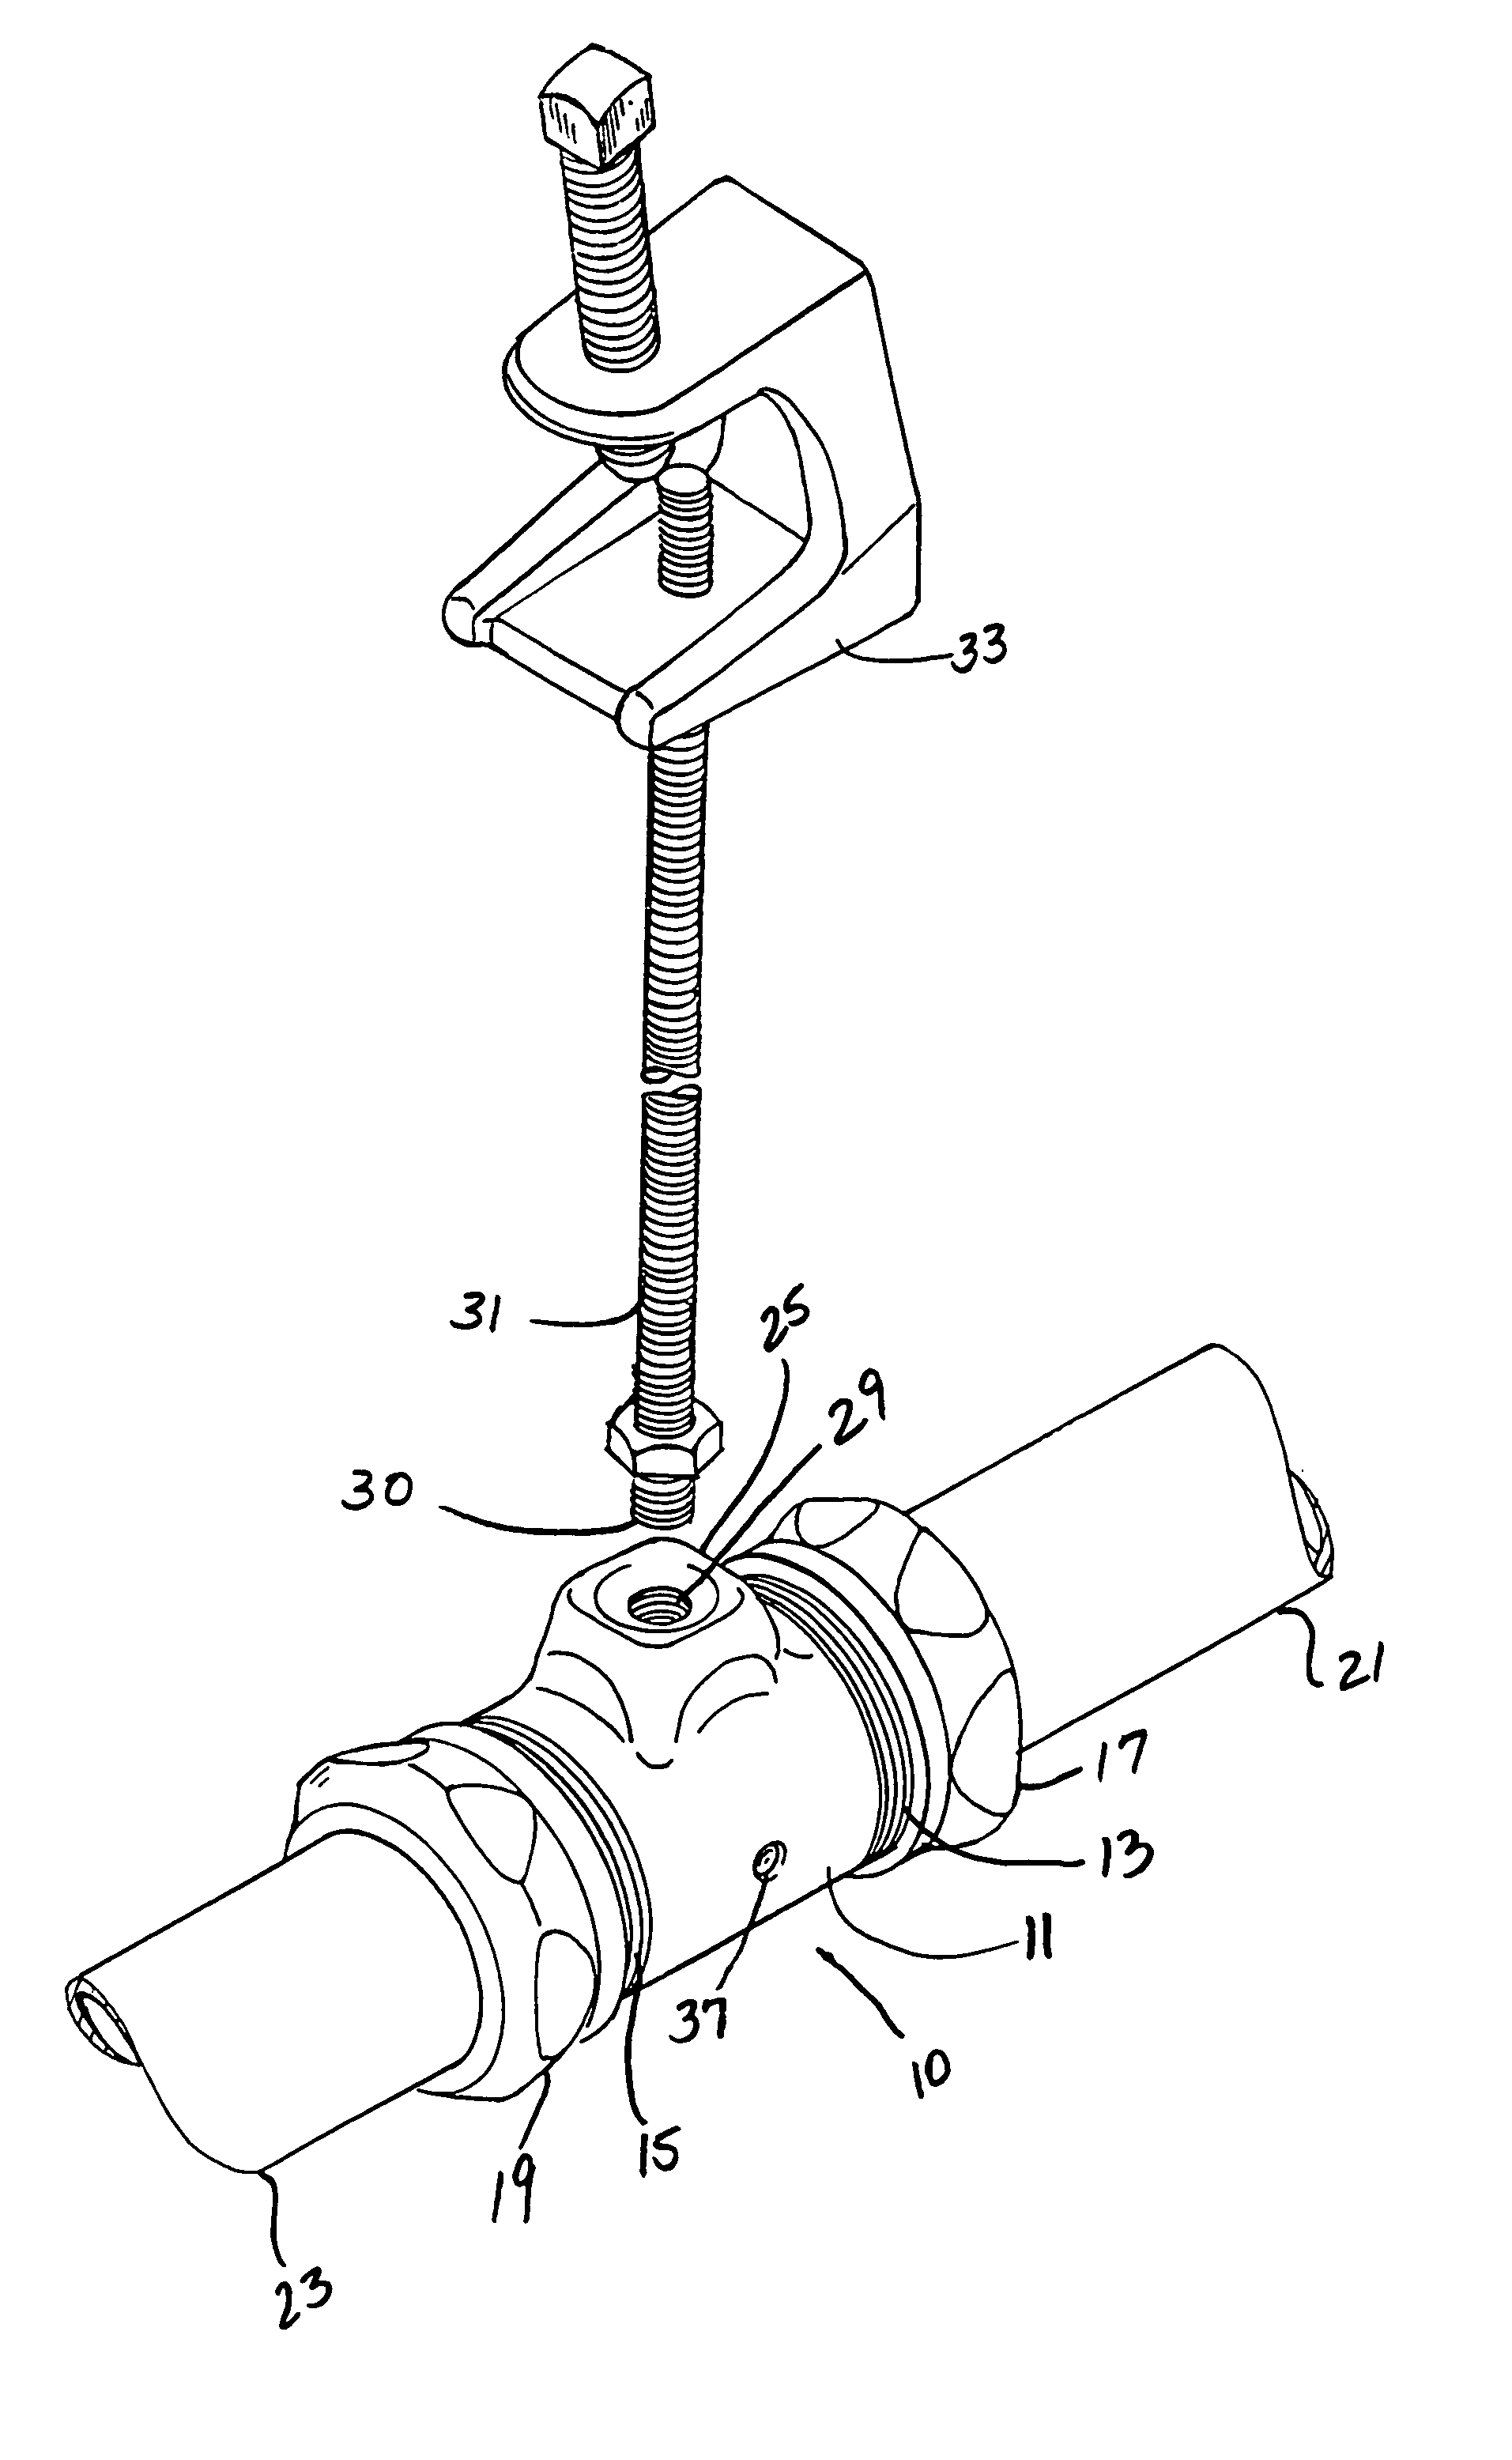 Connector for electrical wire-carrying conduits